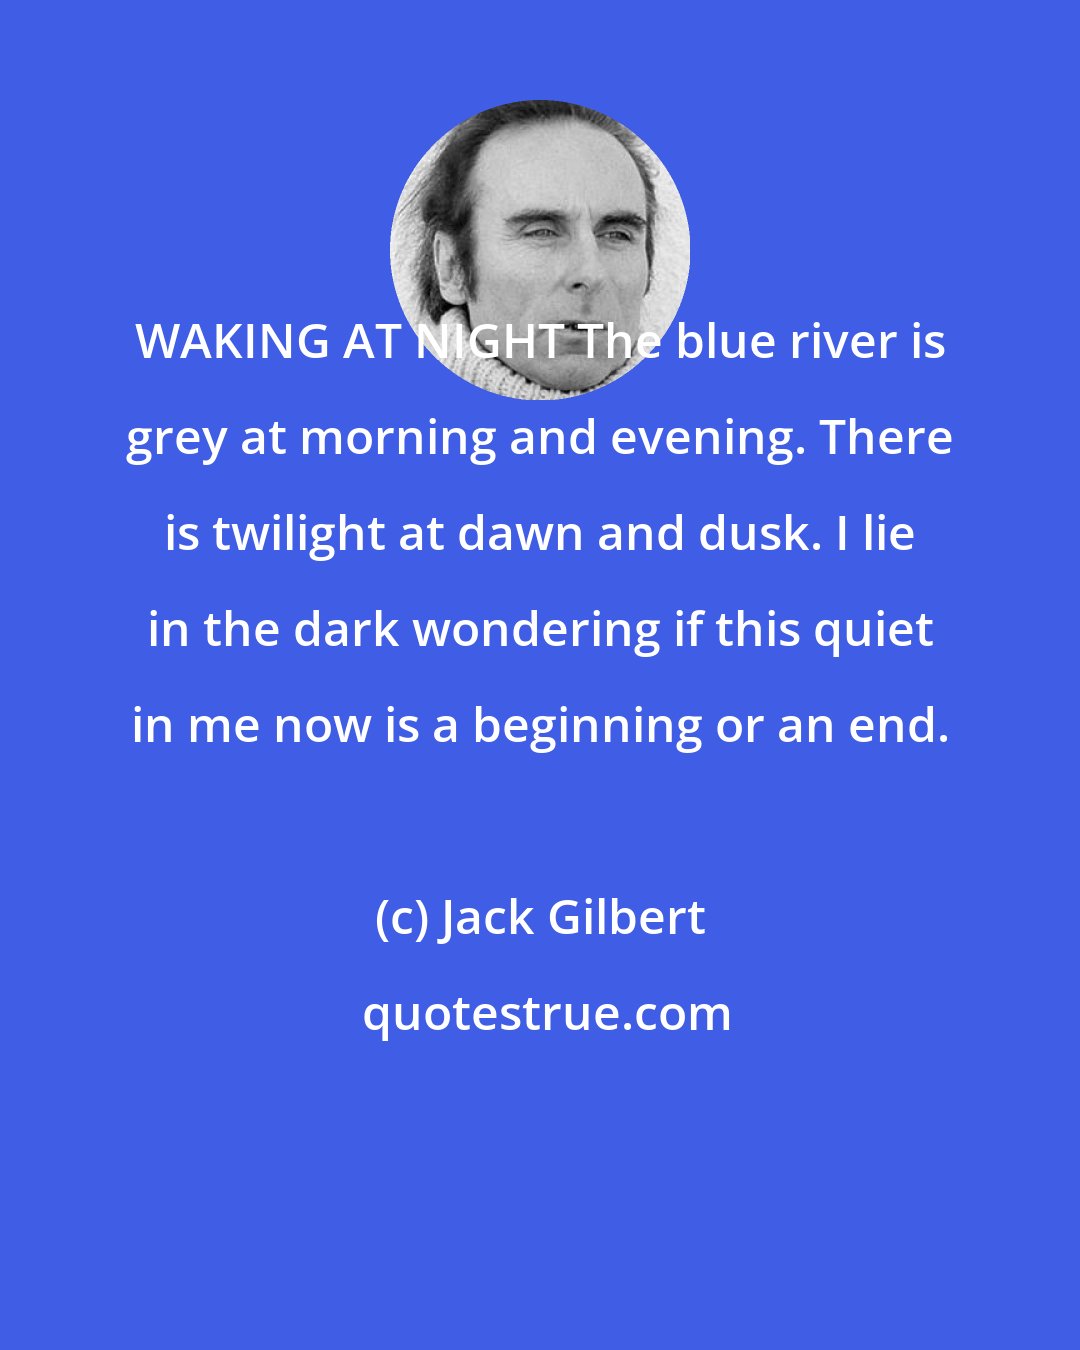 Jack Gilbert: WAKING AT NIGHT The blue river is grey at morning and evening. There is twilight at dawn and dusk. I lie in the dark wondering if this quiet in me now is a beginning or an end.